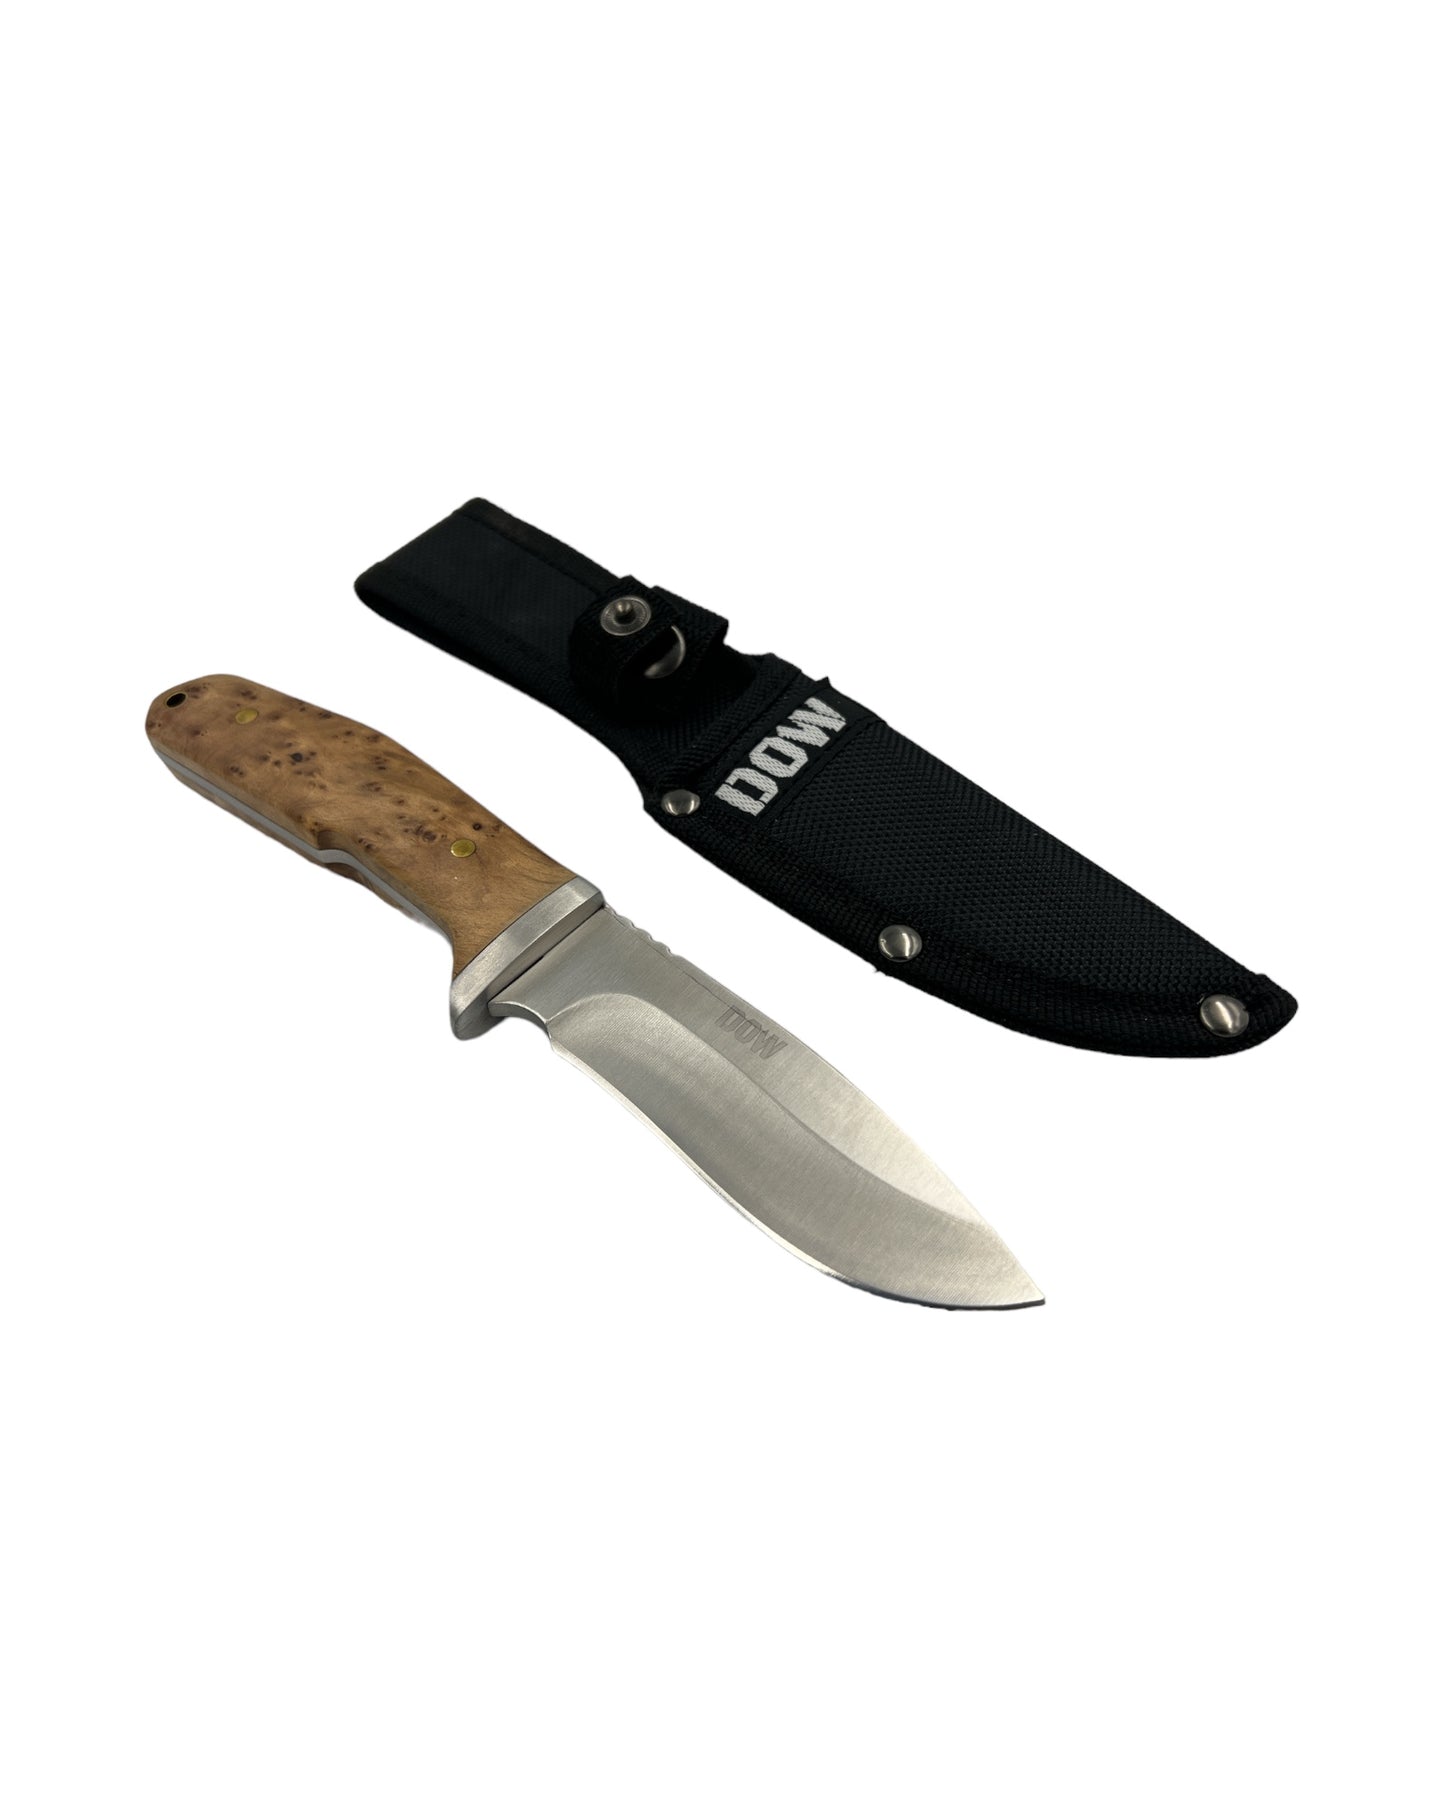 DOW The Dall Sheep Knife